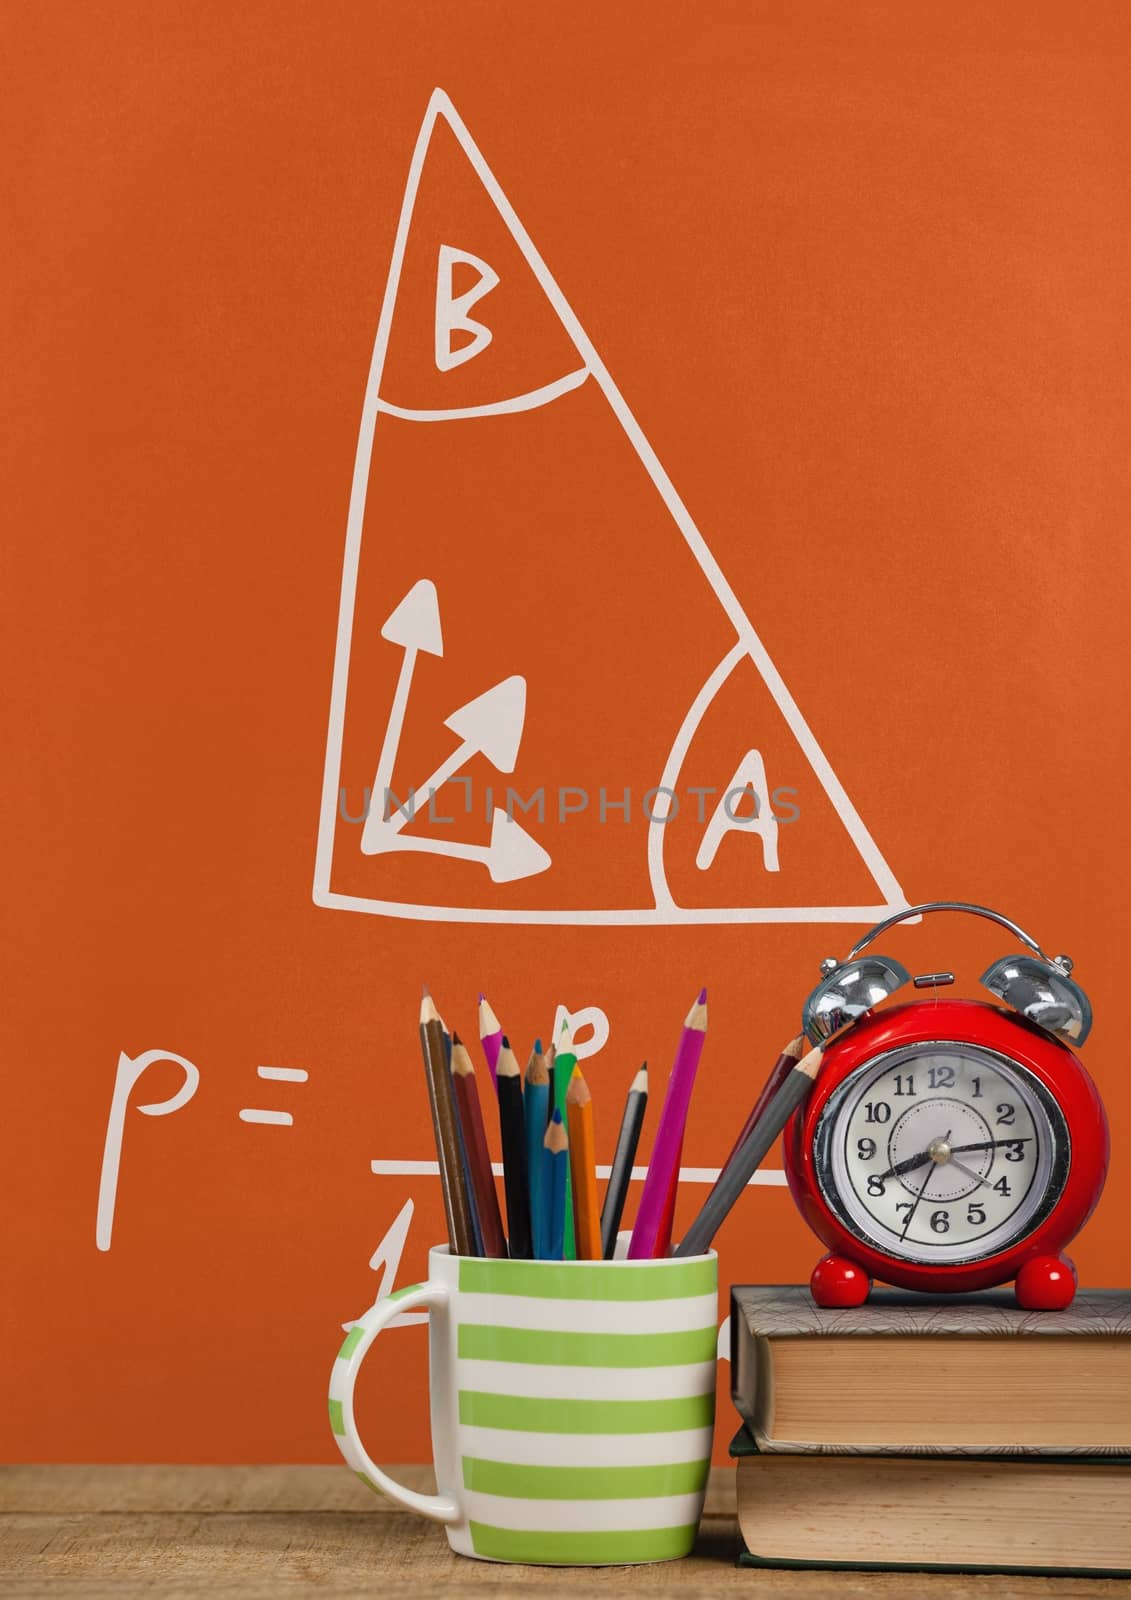 Books on the table against orange blackboard with education and school graphics by Wavebreakmedia